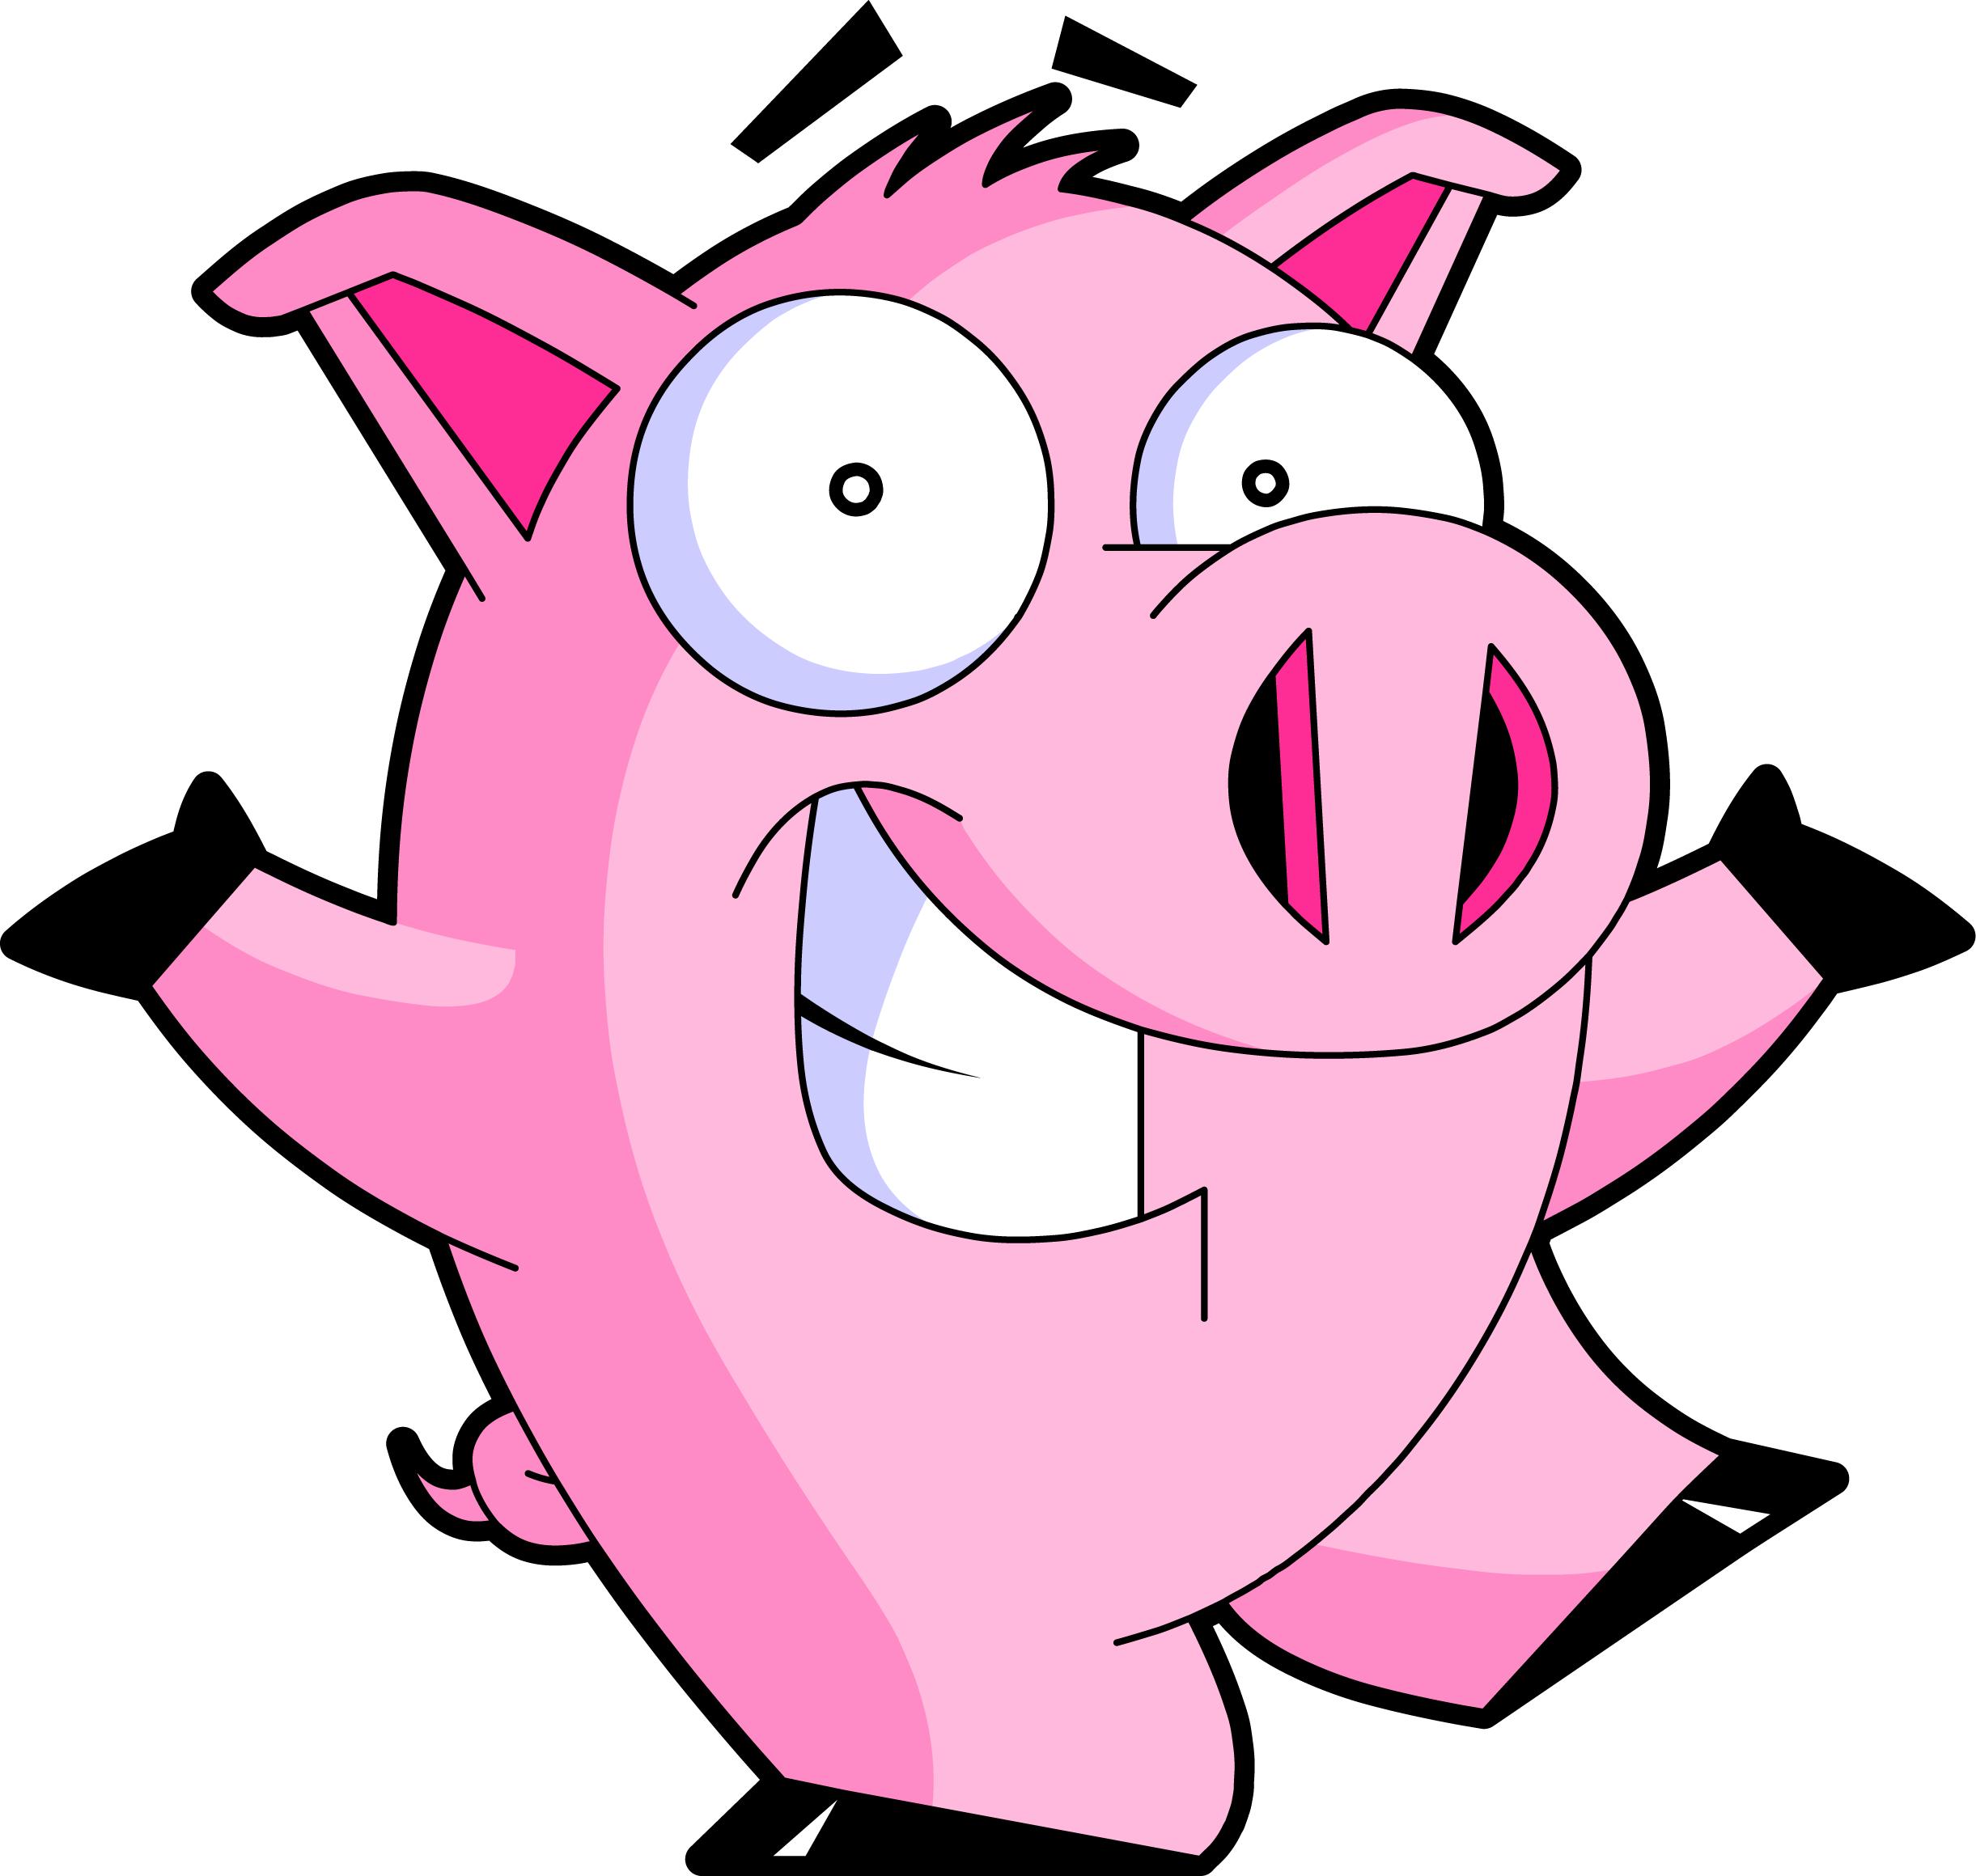 Pictures Of Animated Pigs - ClipArt Best - Cliparts.co